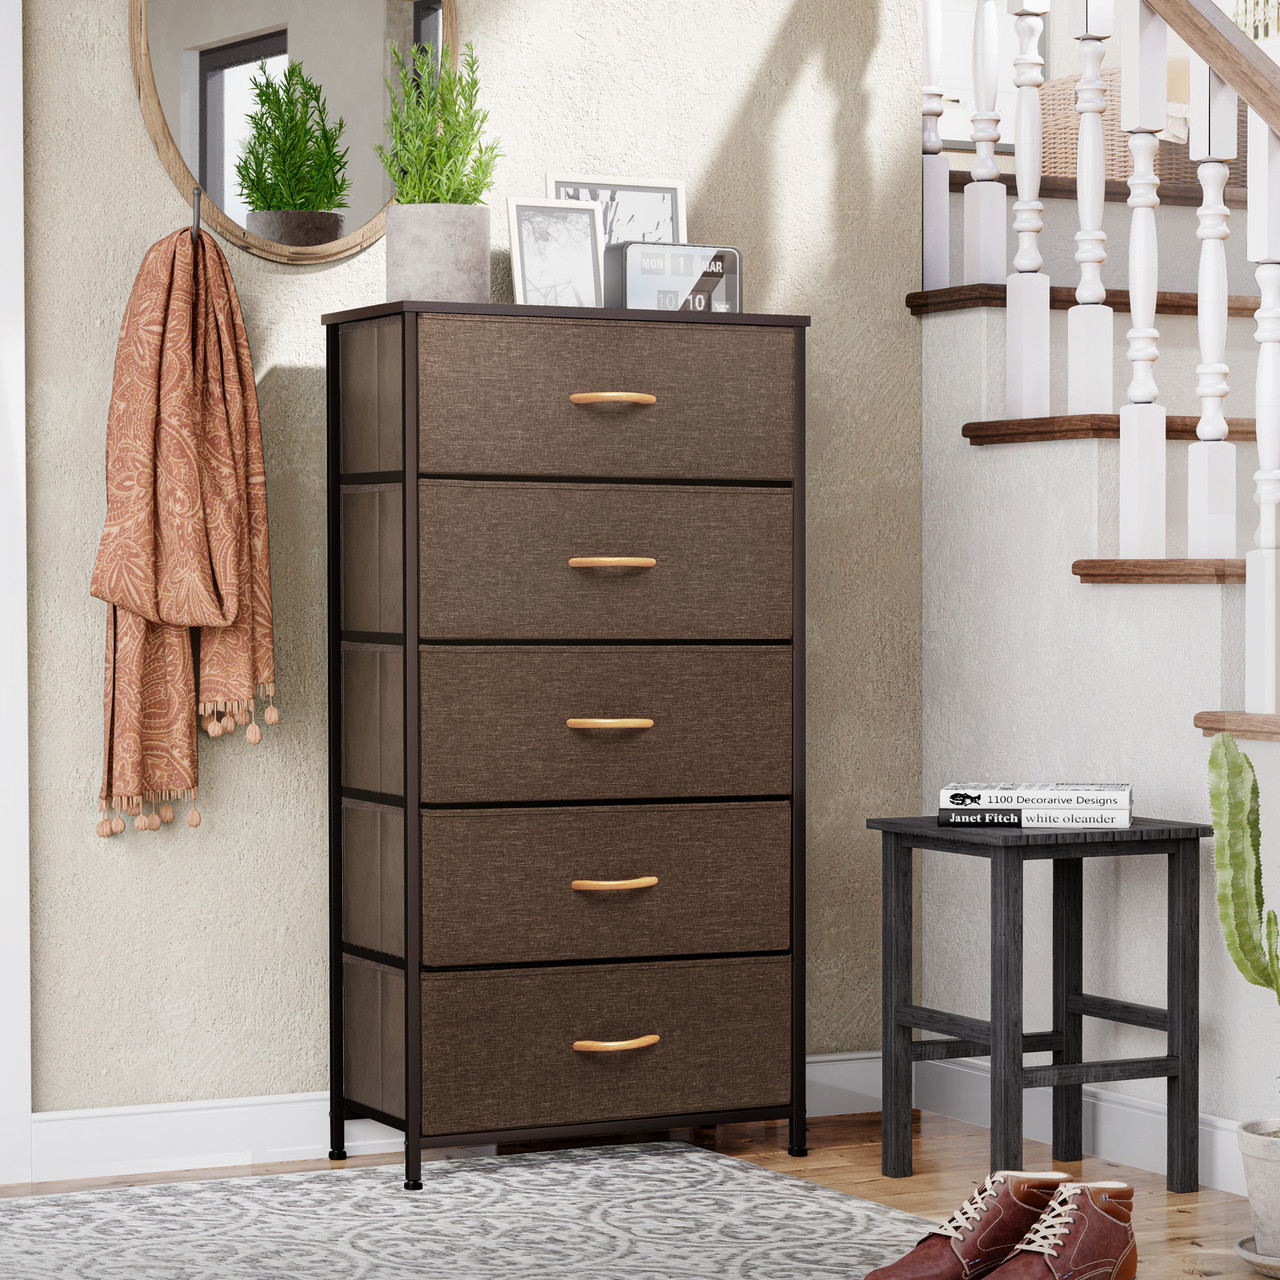 Crestlive Products 5-Drawers Storage Drawers with Wood Shelf Handle at the  best price of 69.99